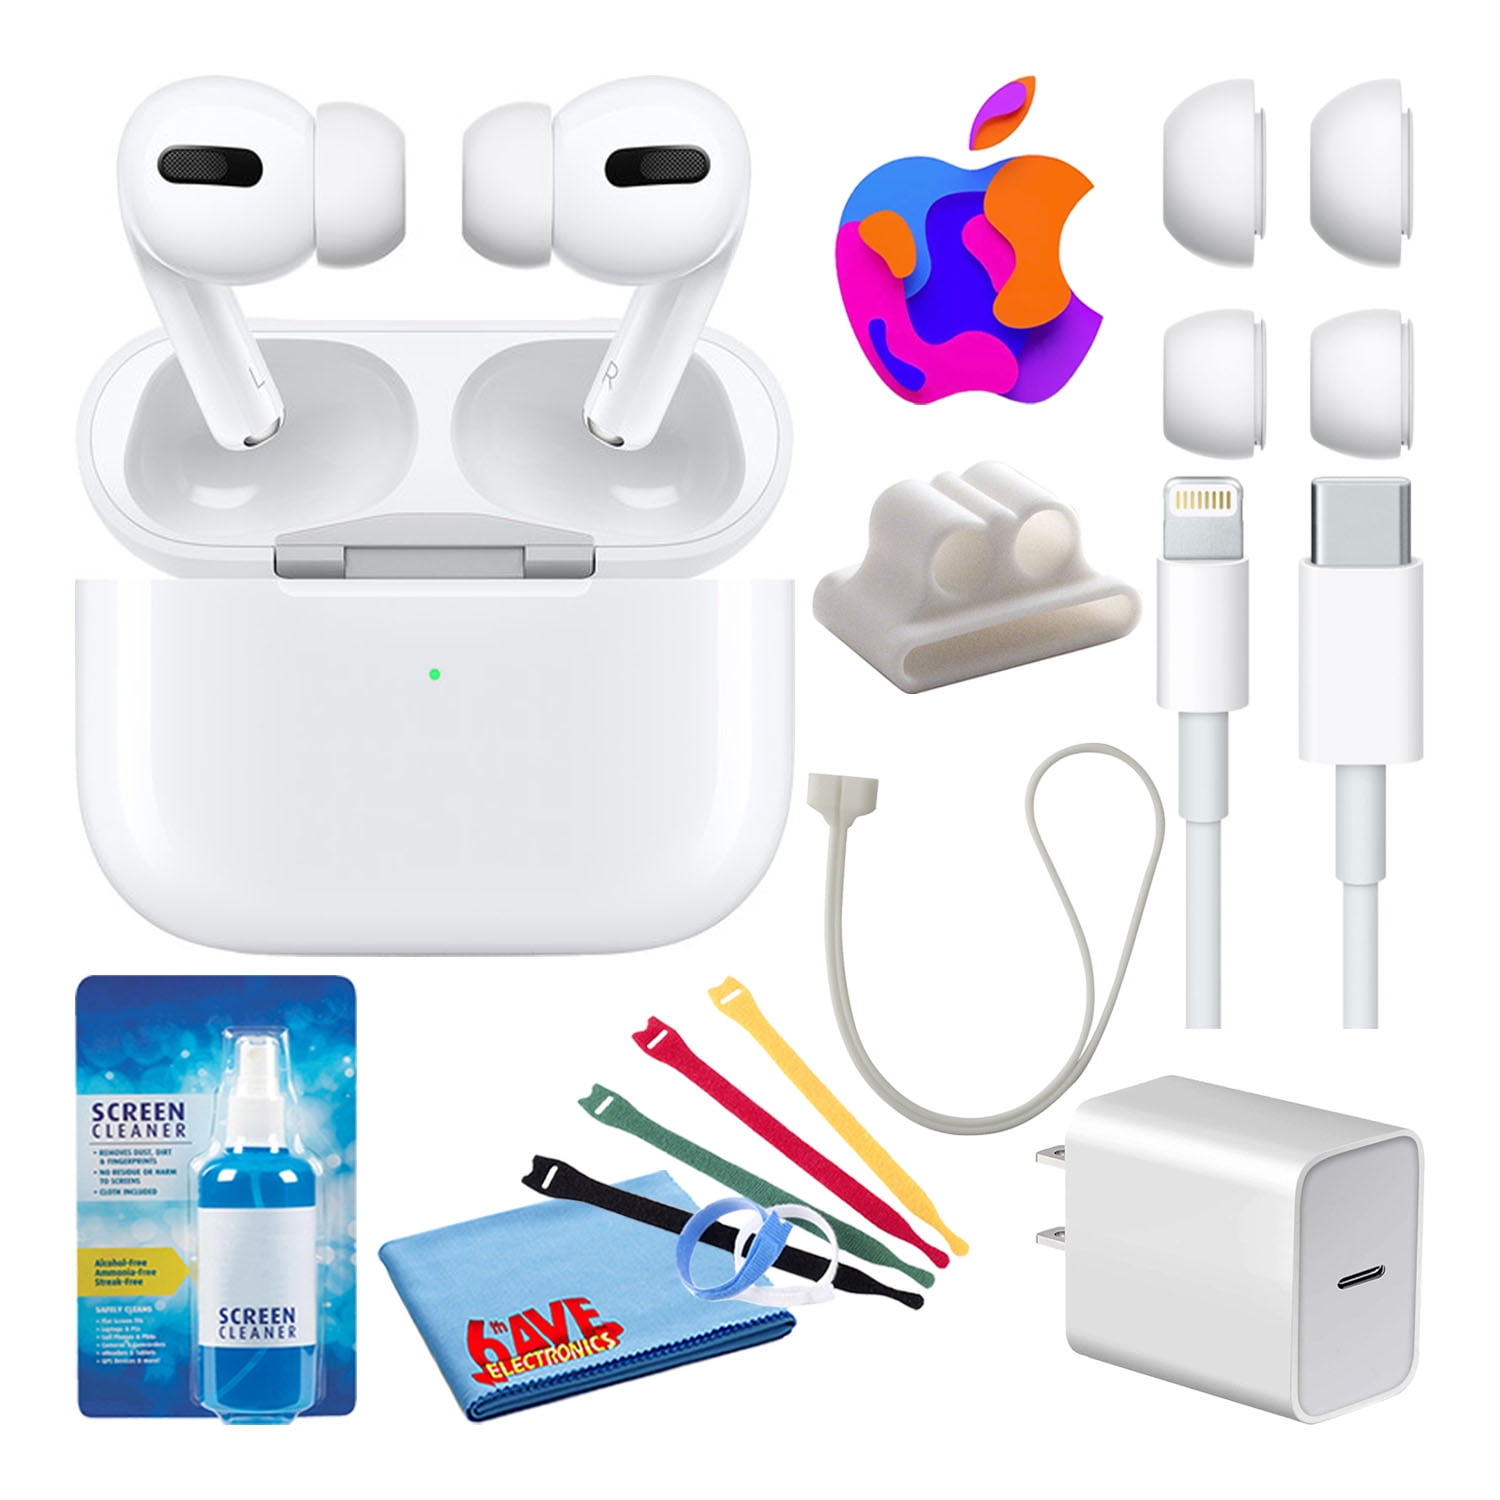 Apple AirPods Pro With Wireless Charging Case White MWP22AM/A Authentic  190199247017